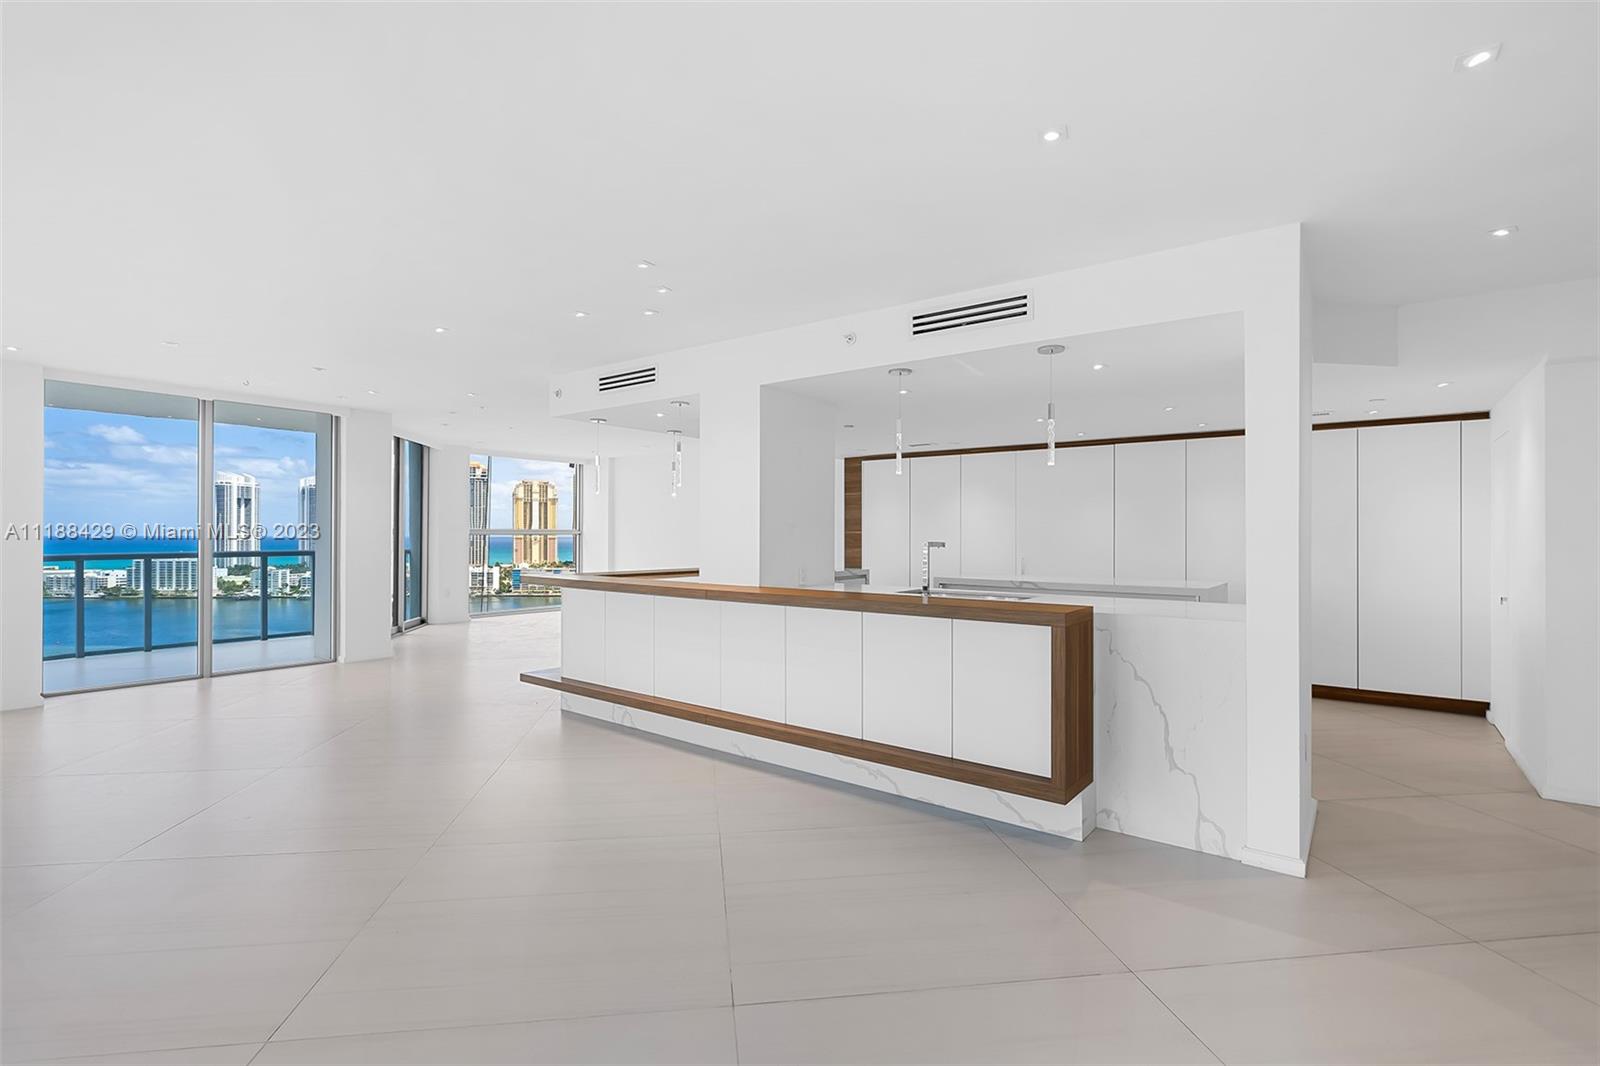 Designer renovated modern and spacious 3 bedroom, 3 baths,  with a contemporary open den.  Complete Impact throughout. Open island kitchen with state of the art appliances.  Spectacular views of Bay, Ocean and Sunny Isles.Concierge service w/country club amenities. BRING OFFERS. Easy to show.